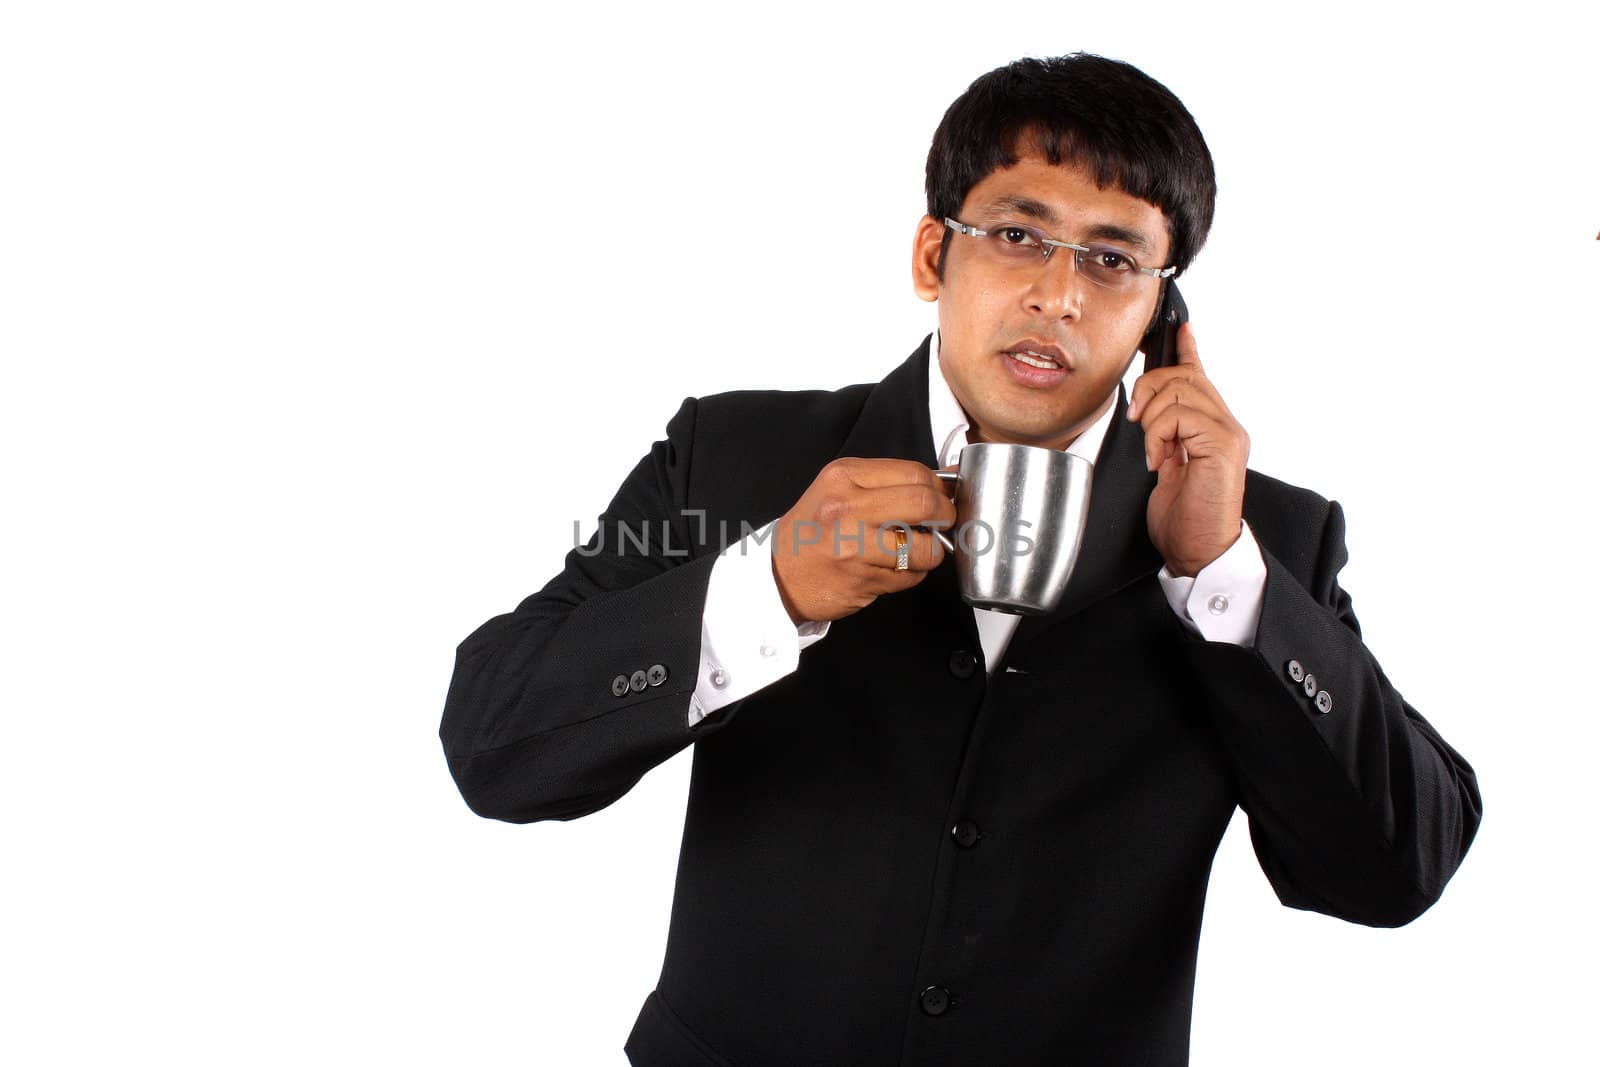 An Indian businessman talking on the cellphone during the coffee break, on white studio background.